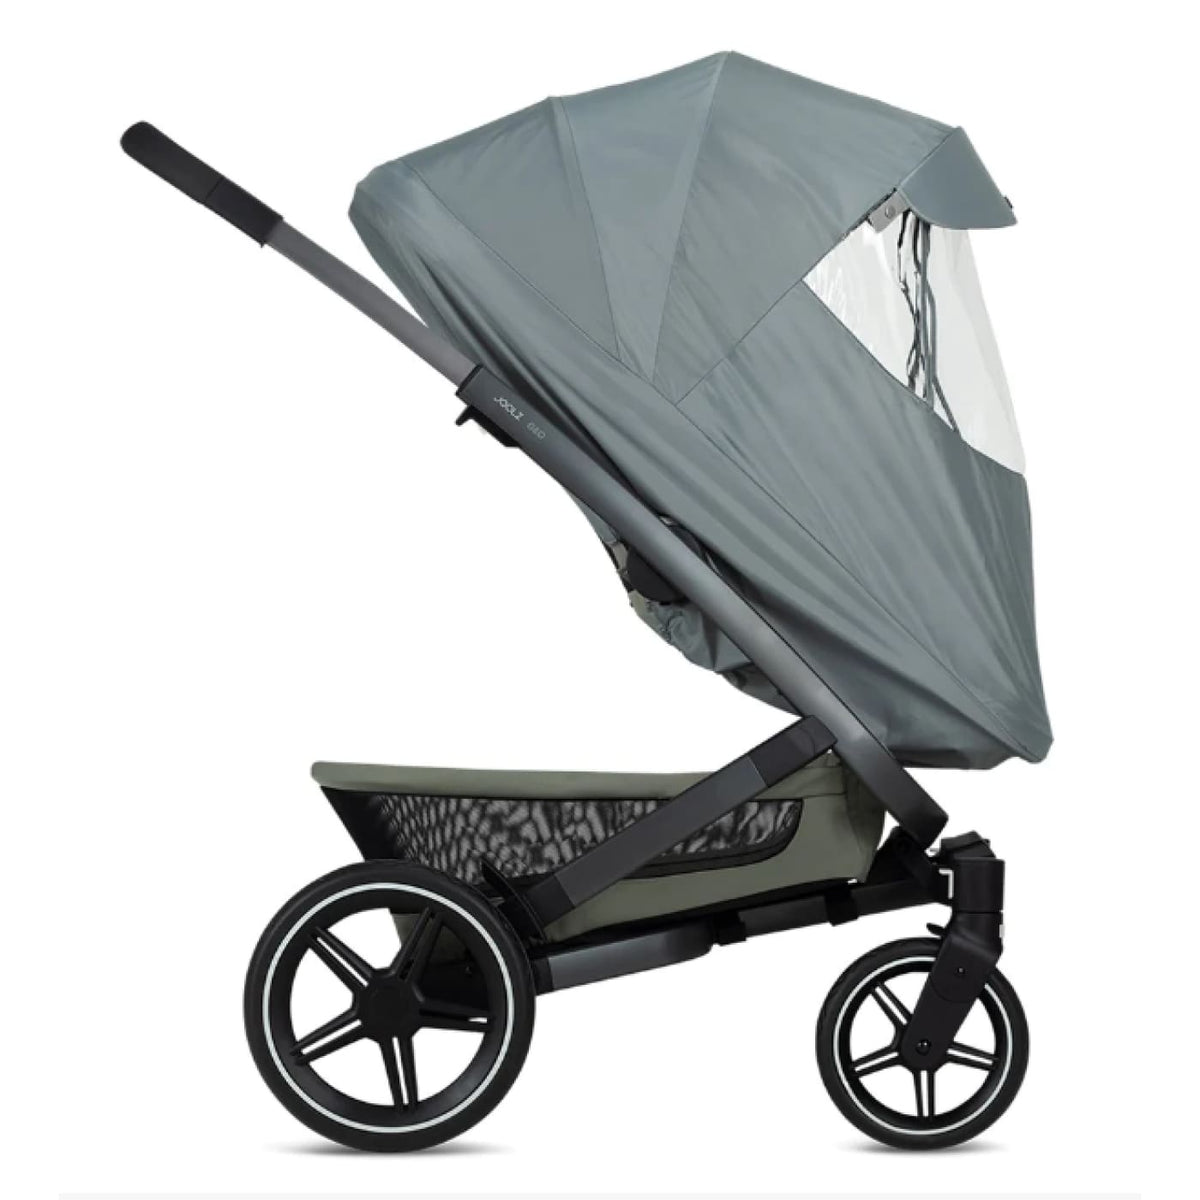 Joolz Geo3 Twin Stroller - Brilliant Black (2 Seat + 2 Carry Cot) - Brilliant Black - PRAMS &amp; STROLLERS - PACKAGES